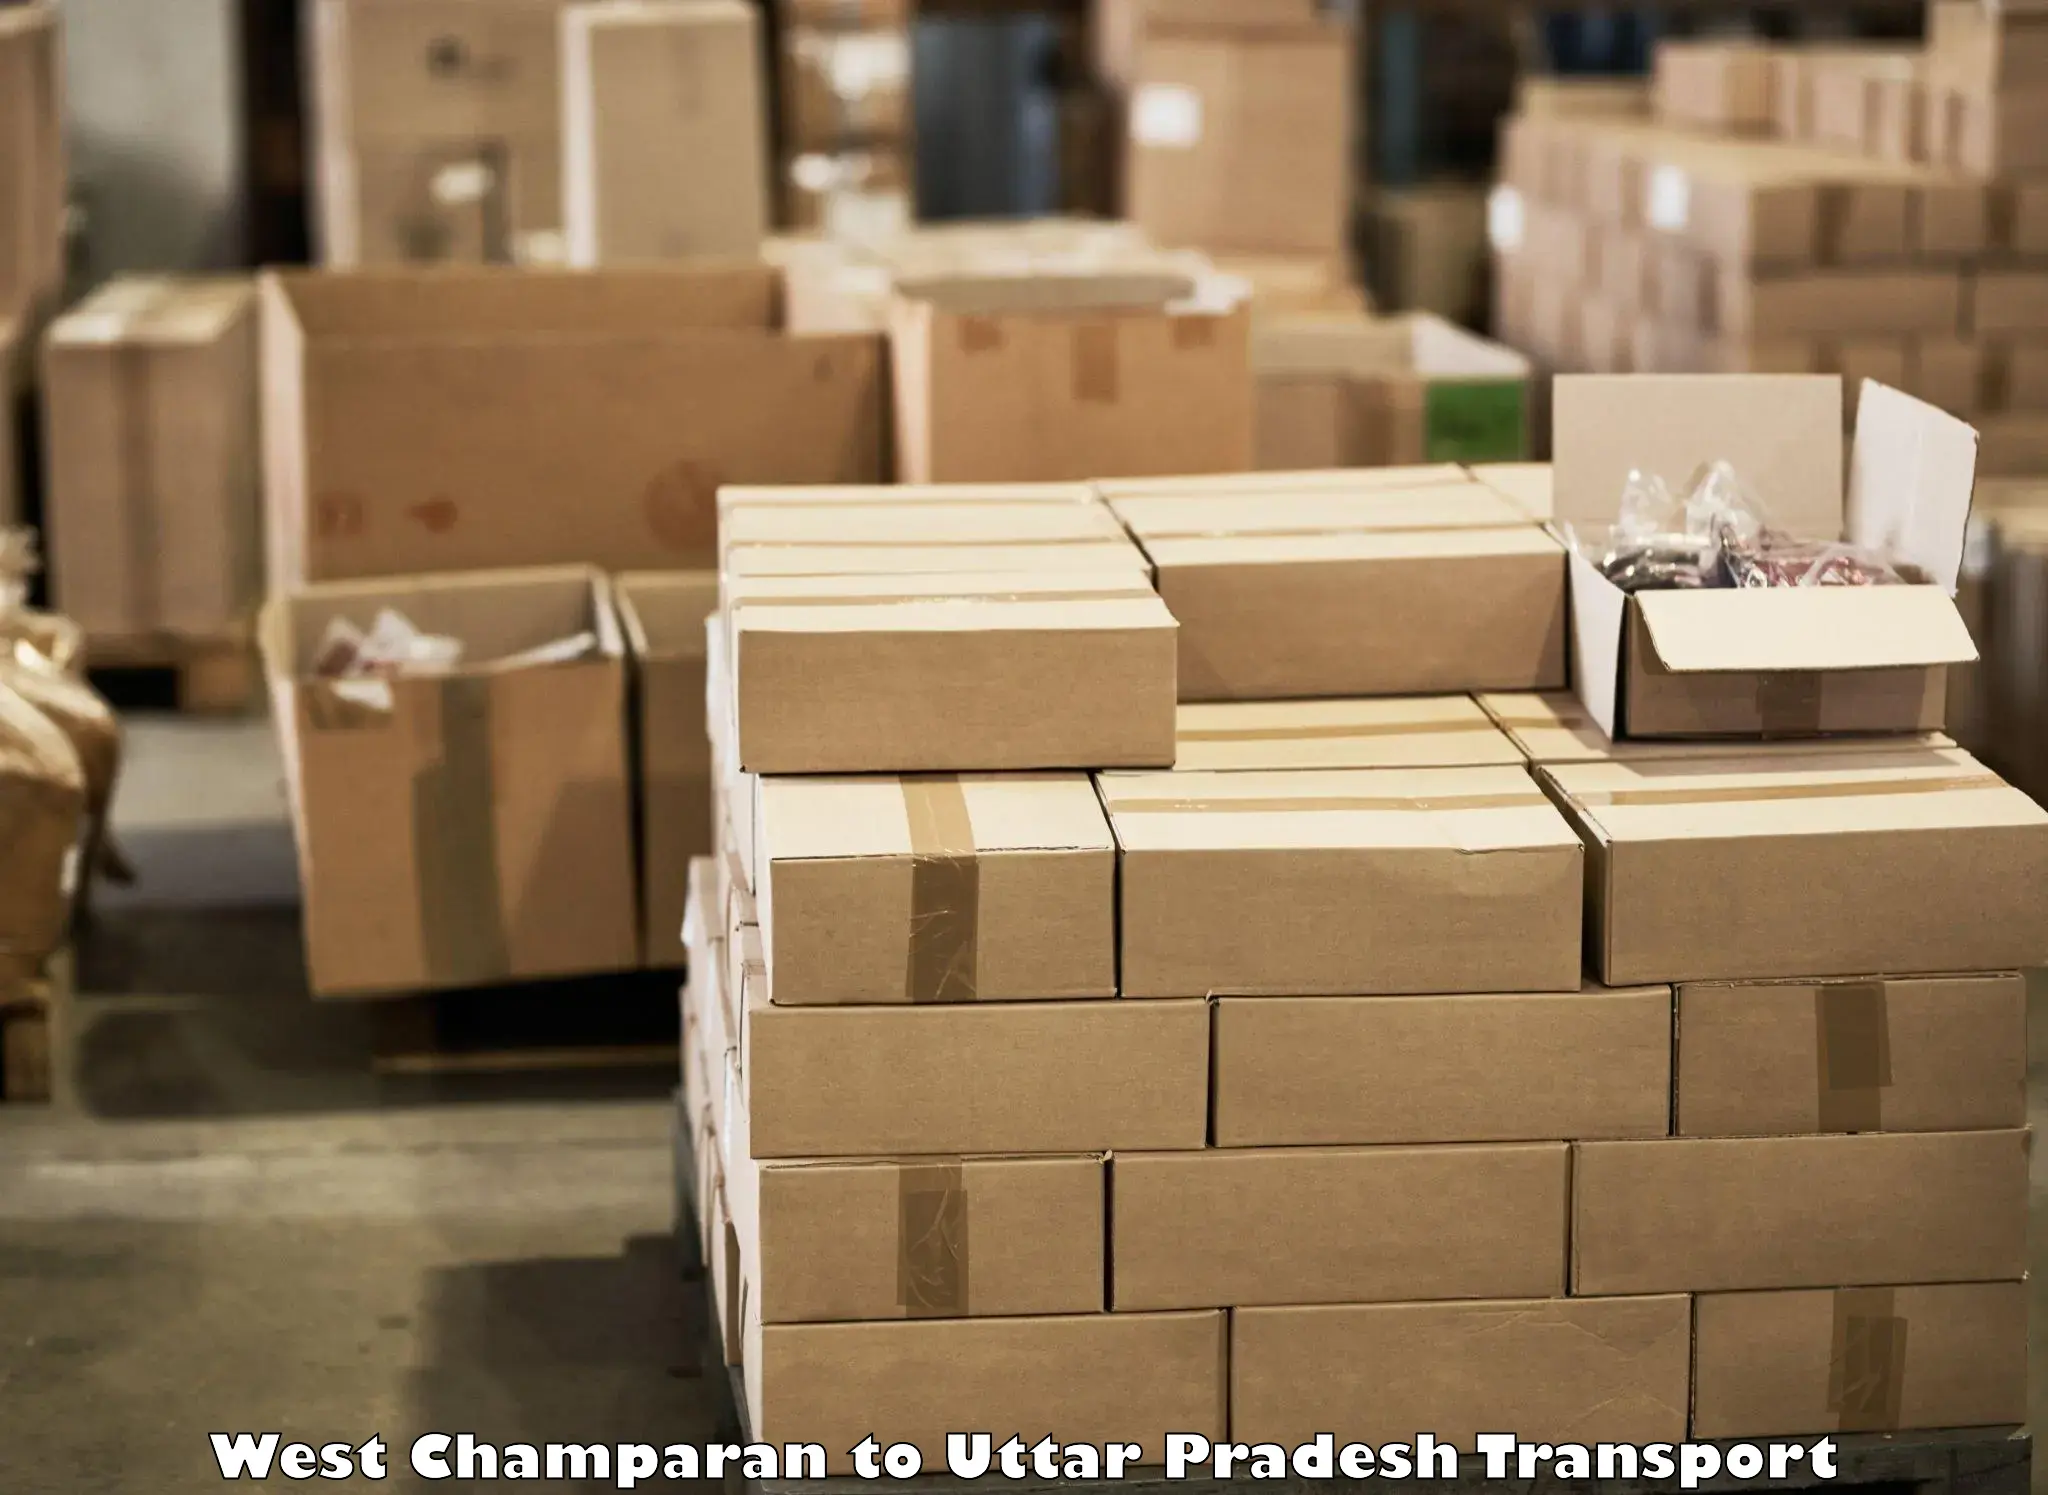 Daily parcel service transport West Champaran to Khalilabad